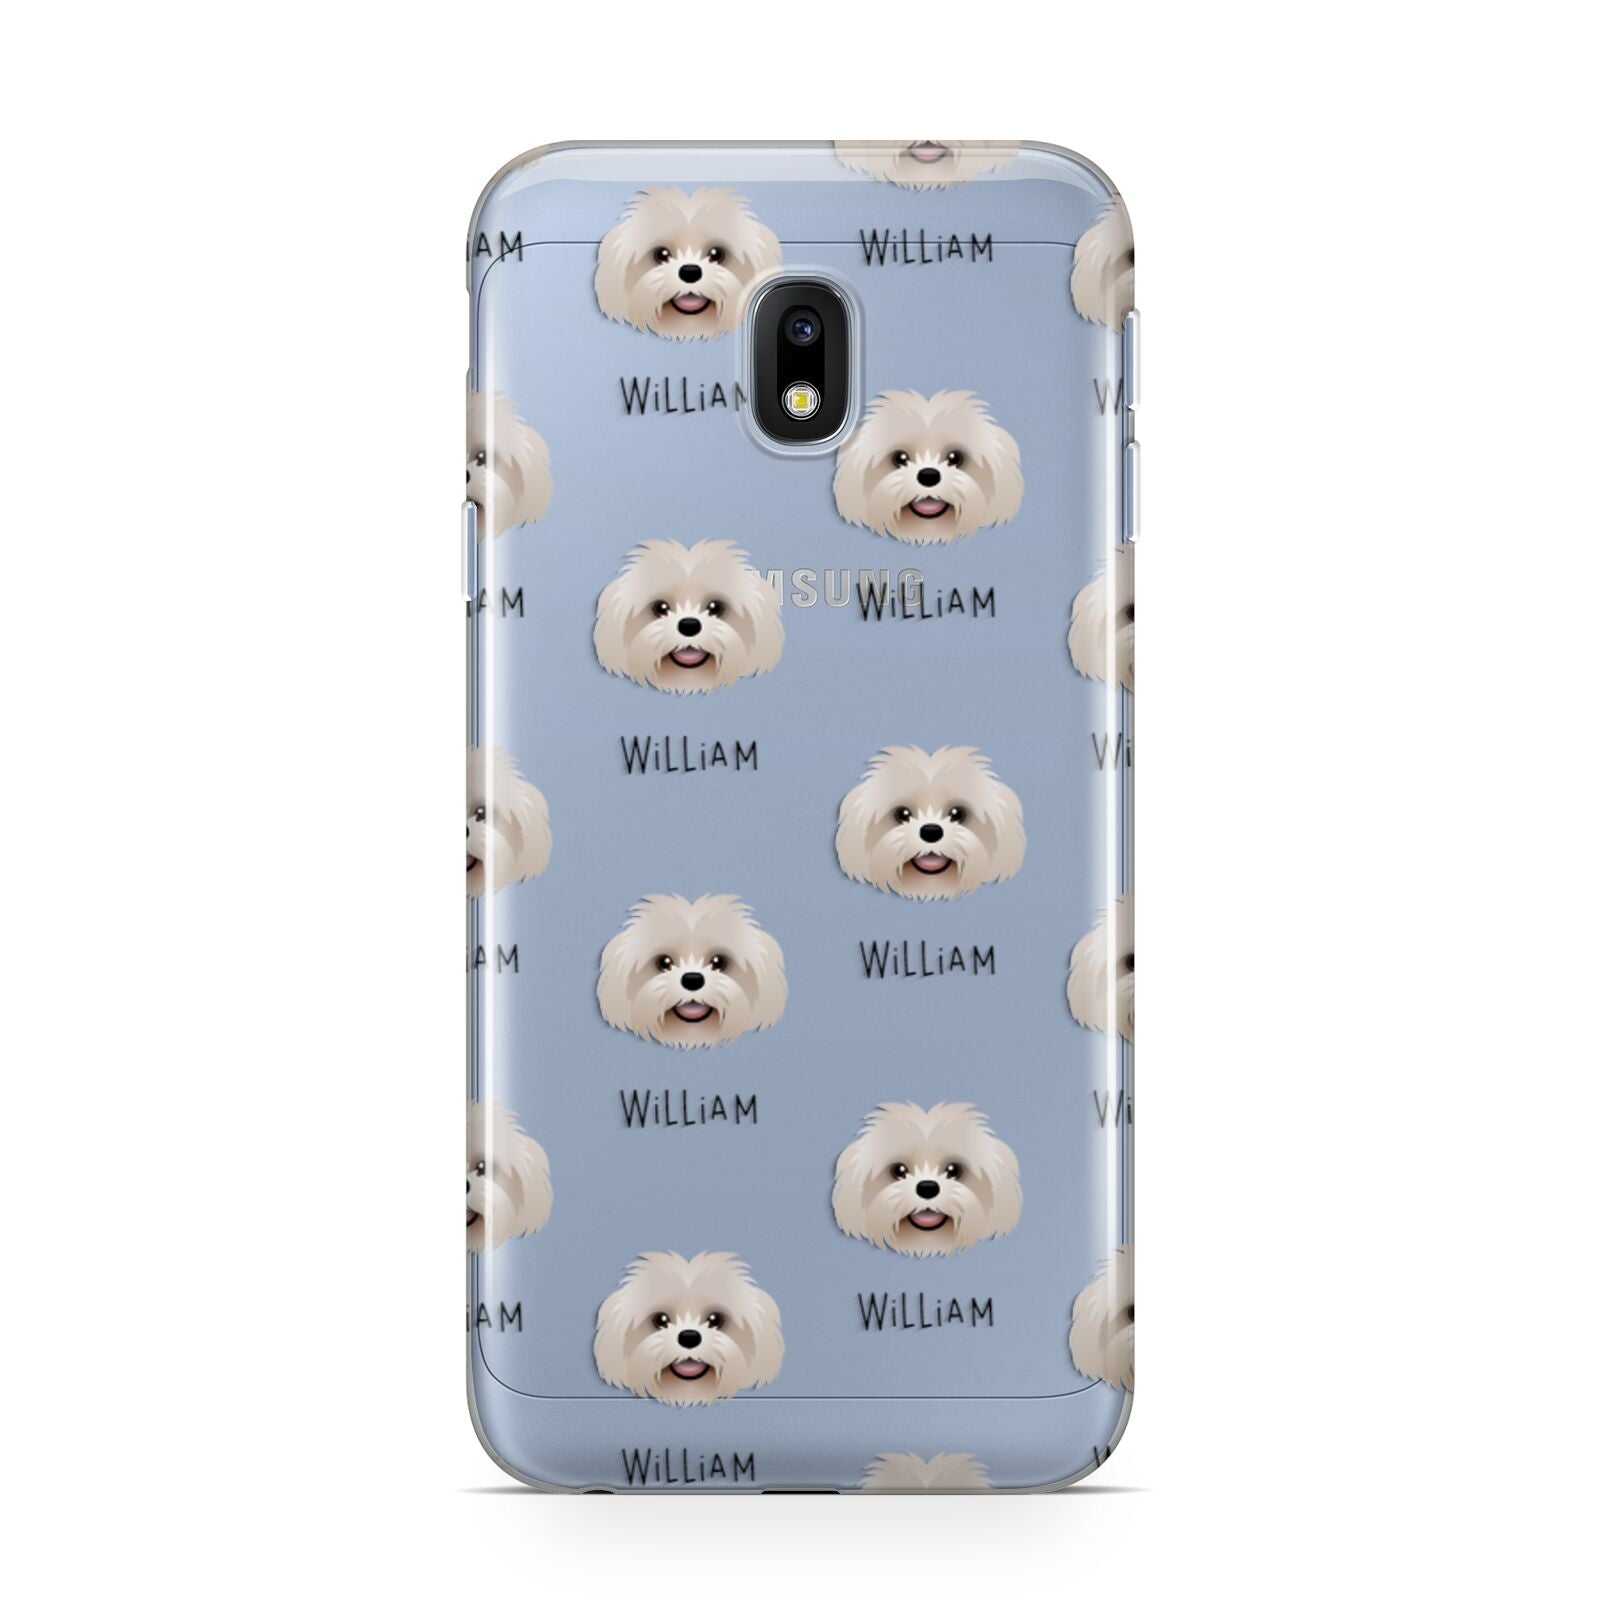 Shih Poo Icon with Name Samsung Galaxy J3 2017 Case